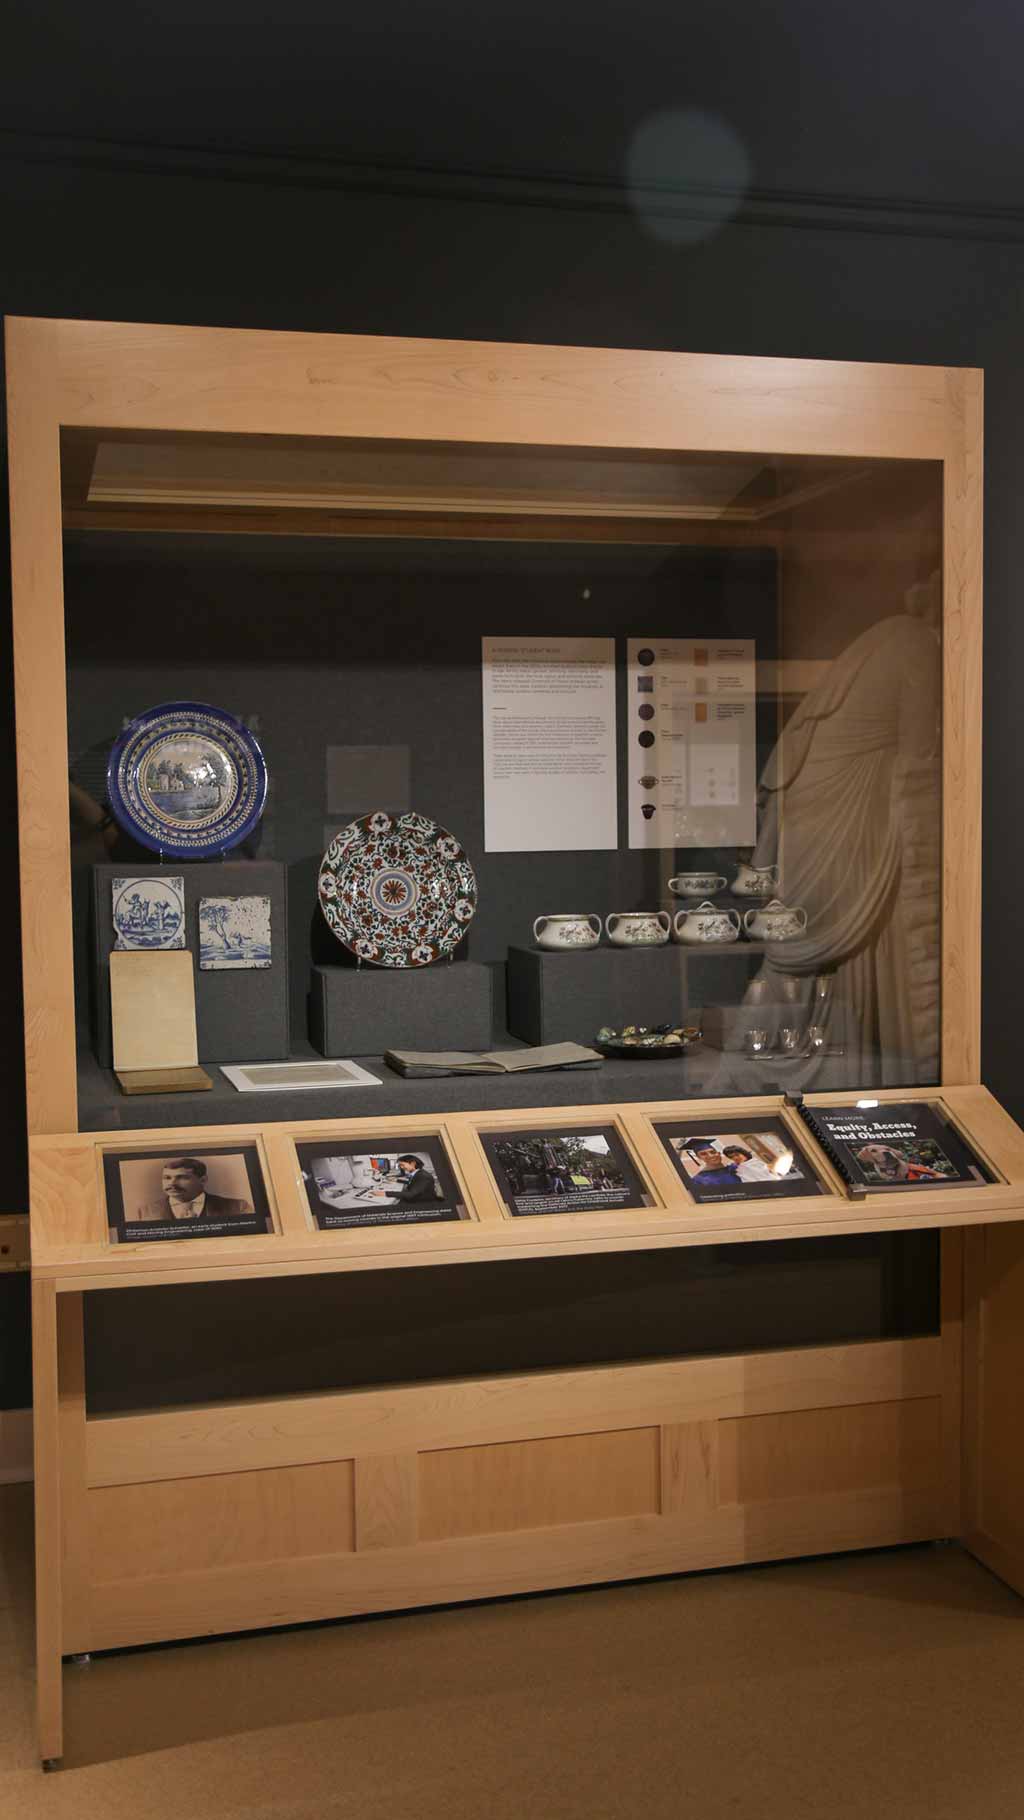 display case with decorative plates, some pots, and a book